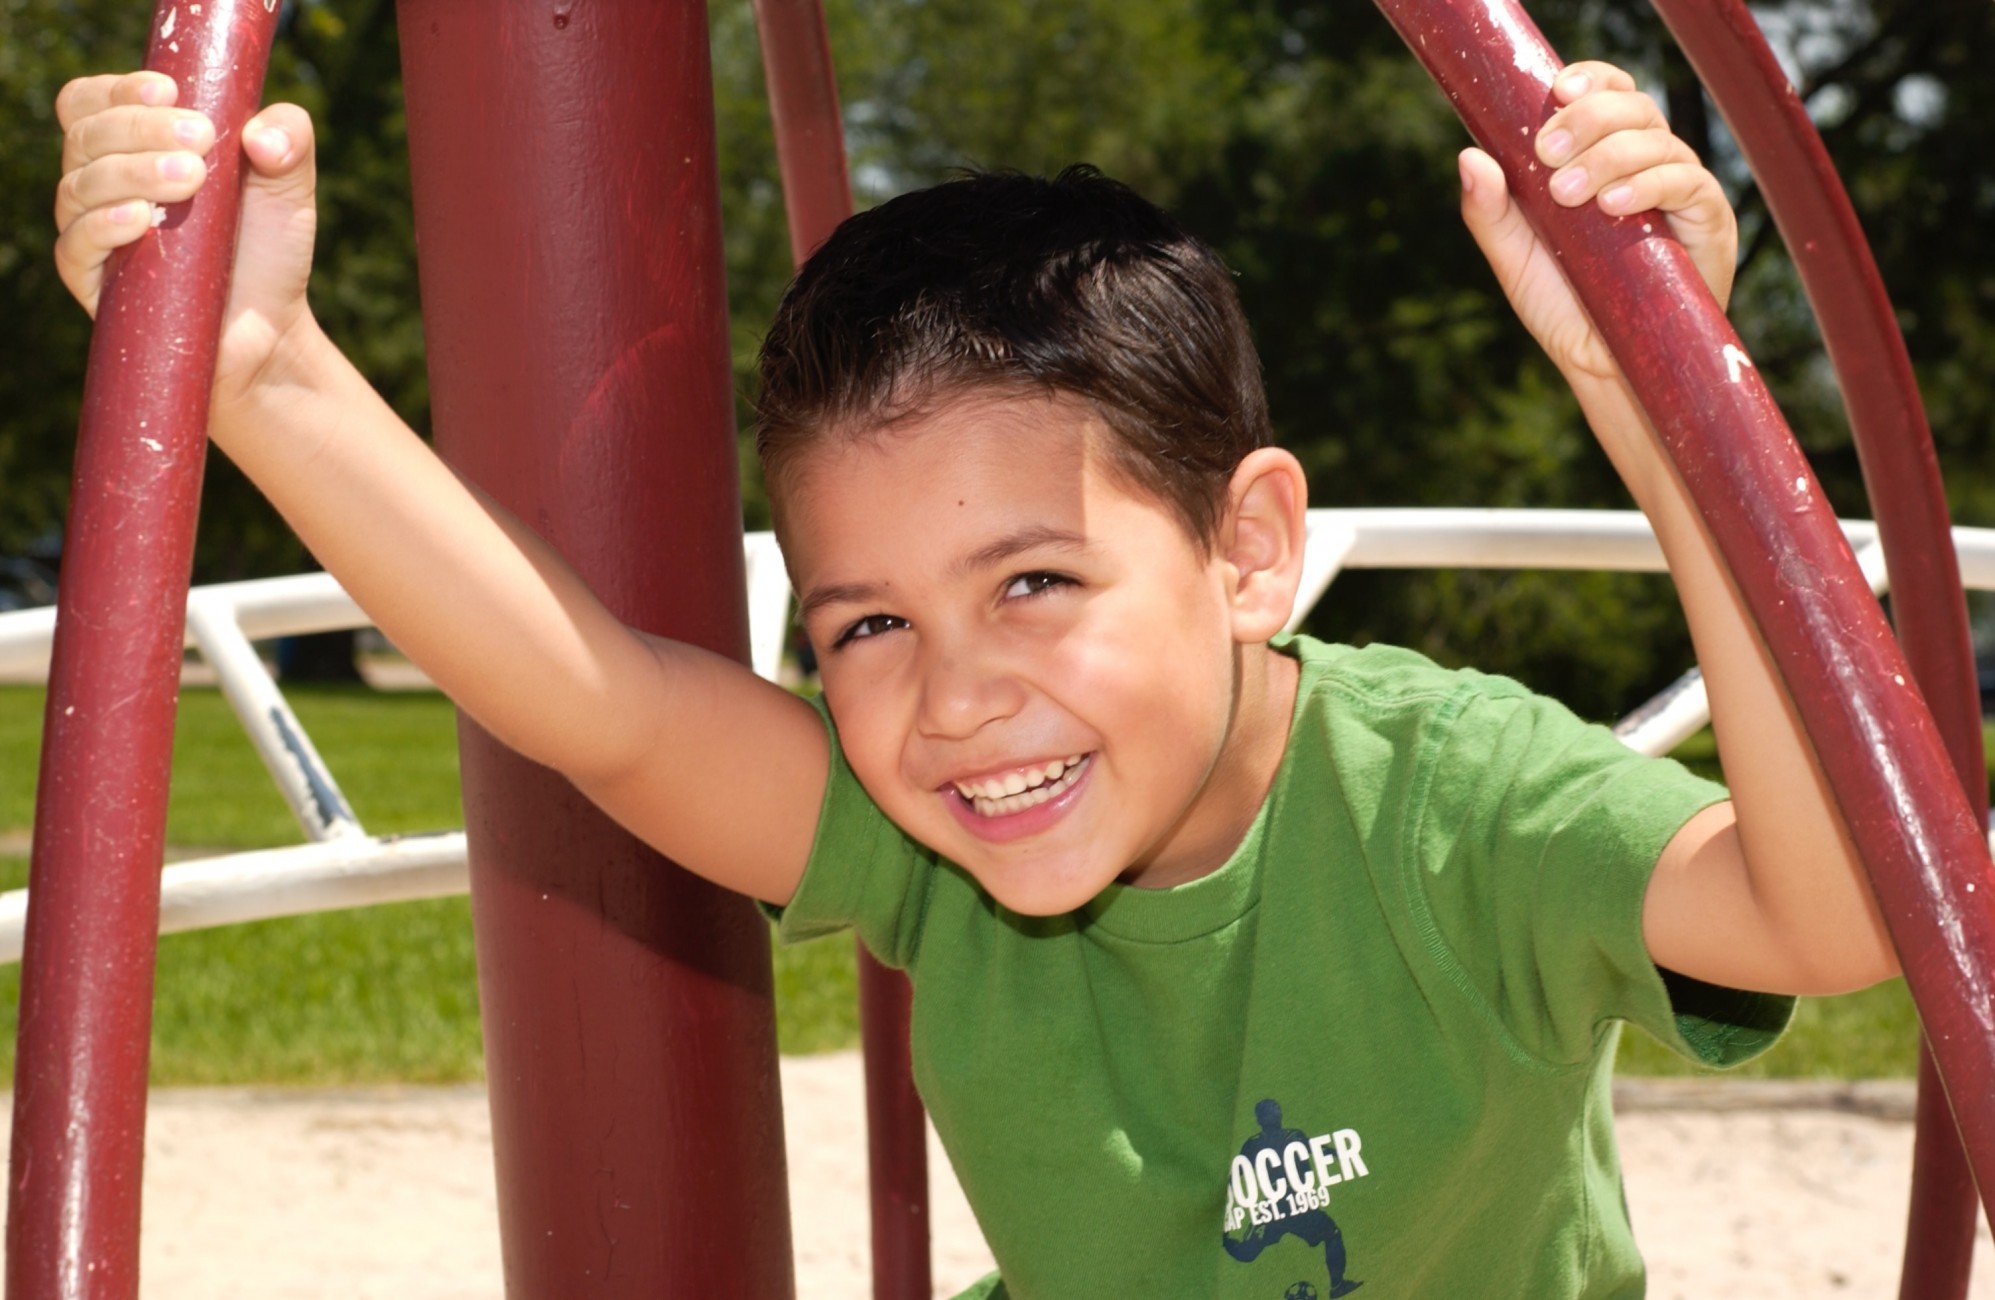 Young boy with black hair smiling at playground in green shirt